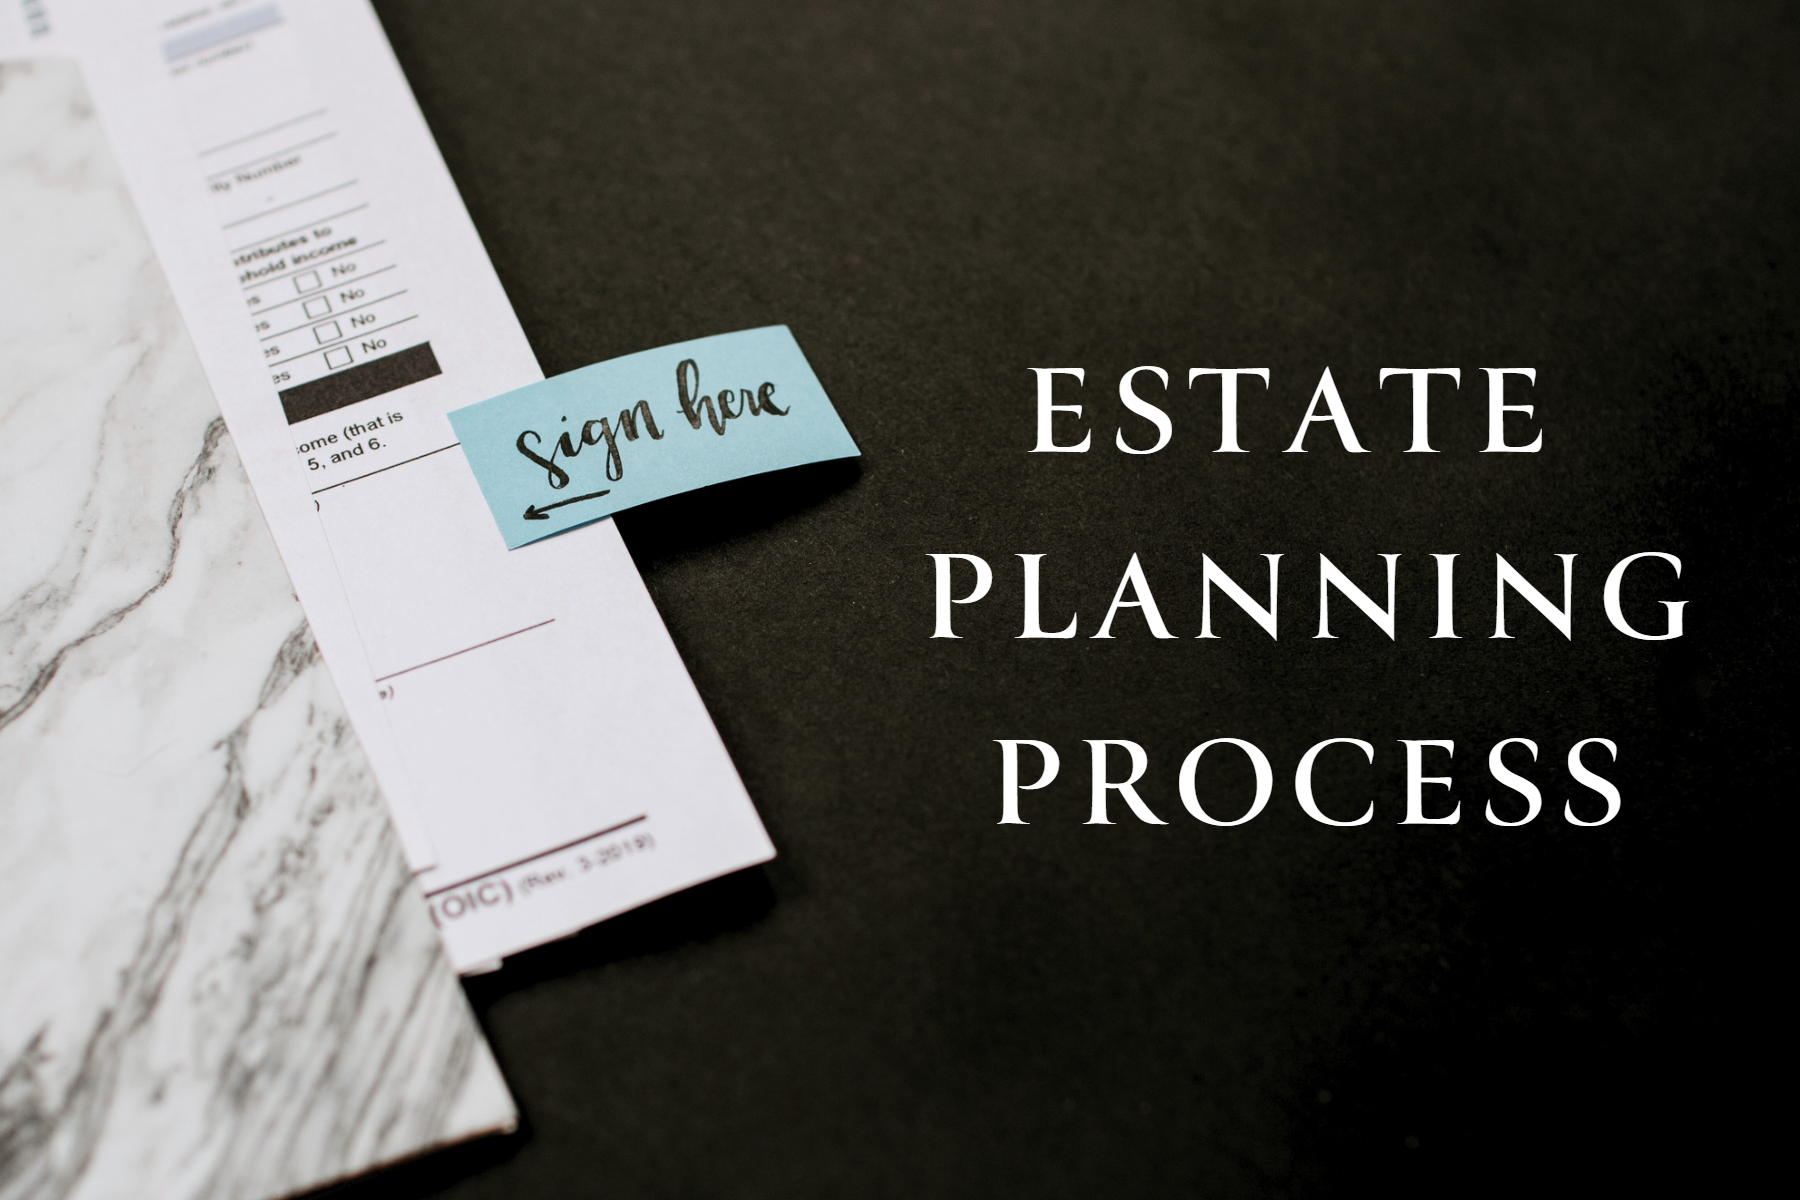 Estate Planning Process cover page